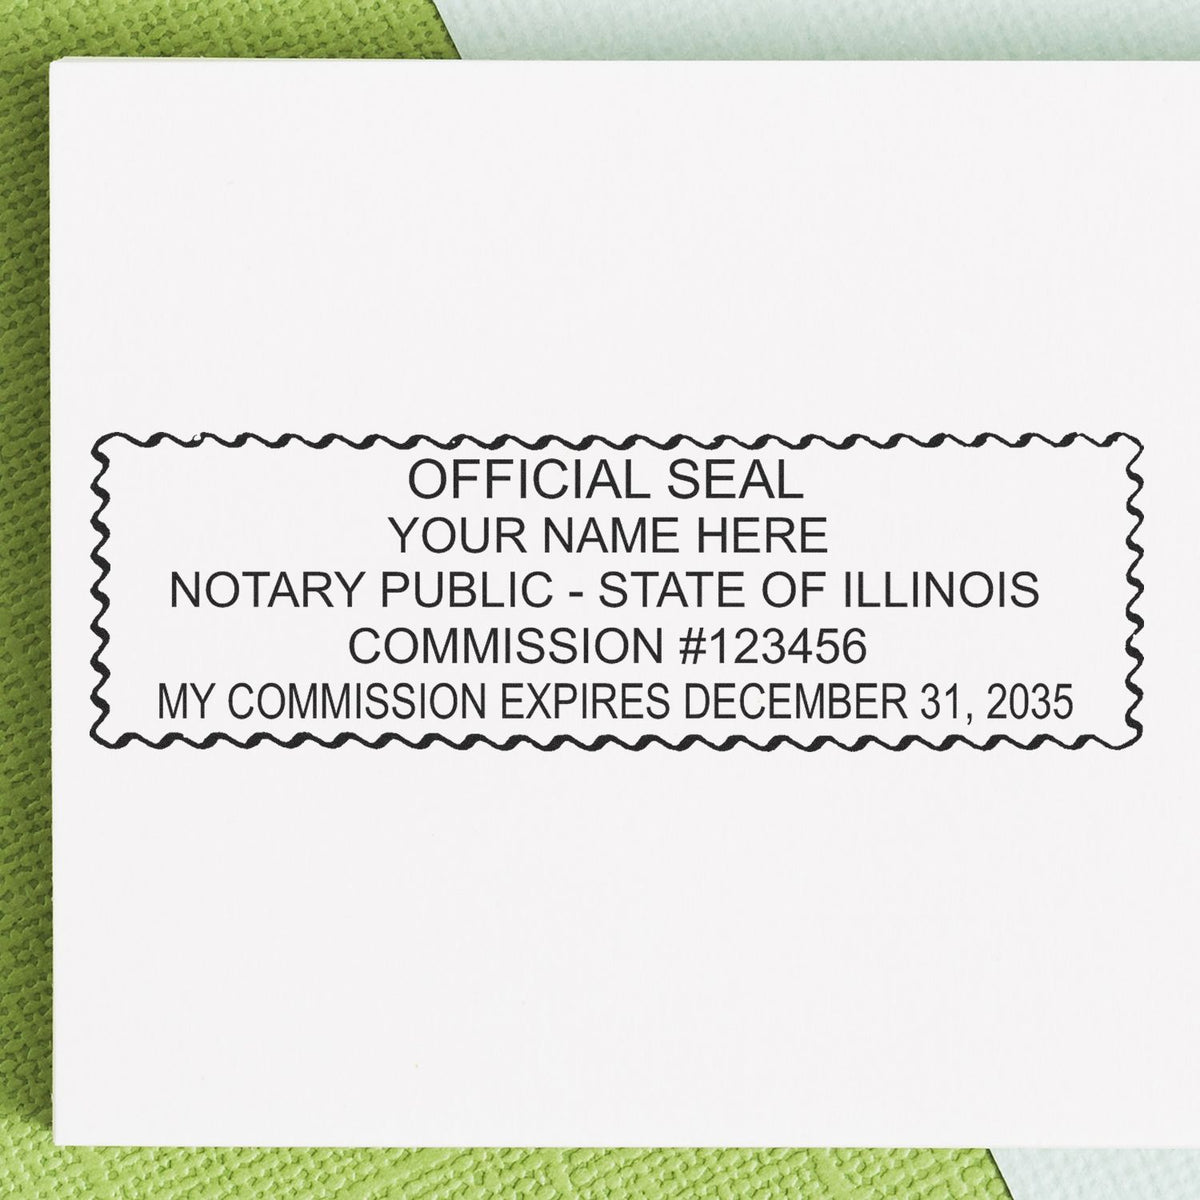 This paper is stamped with a sample imprint of the Super Slim Illinois Notary Public Stamp, signifying its quality and reliability.